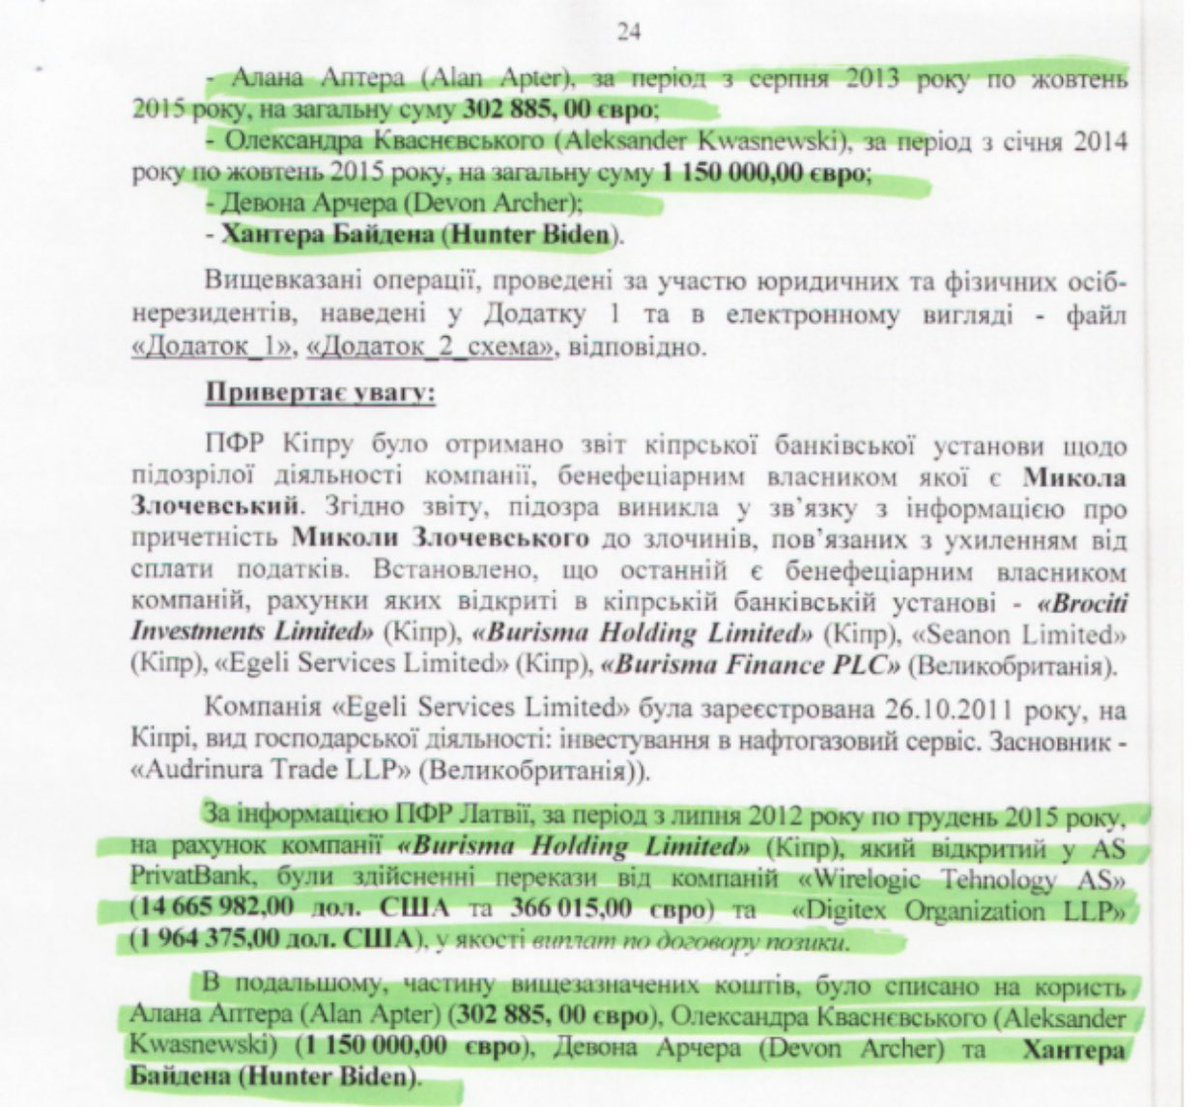 According to the Department of Financial Monitoring (Counter-intelligence) of Latvia, the following sums of money were obtained from Busima Holding Limited (Cyprus) which is open at AS PrivatBank in Latvia: